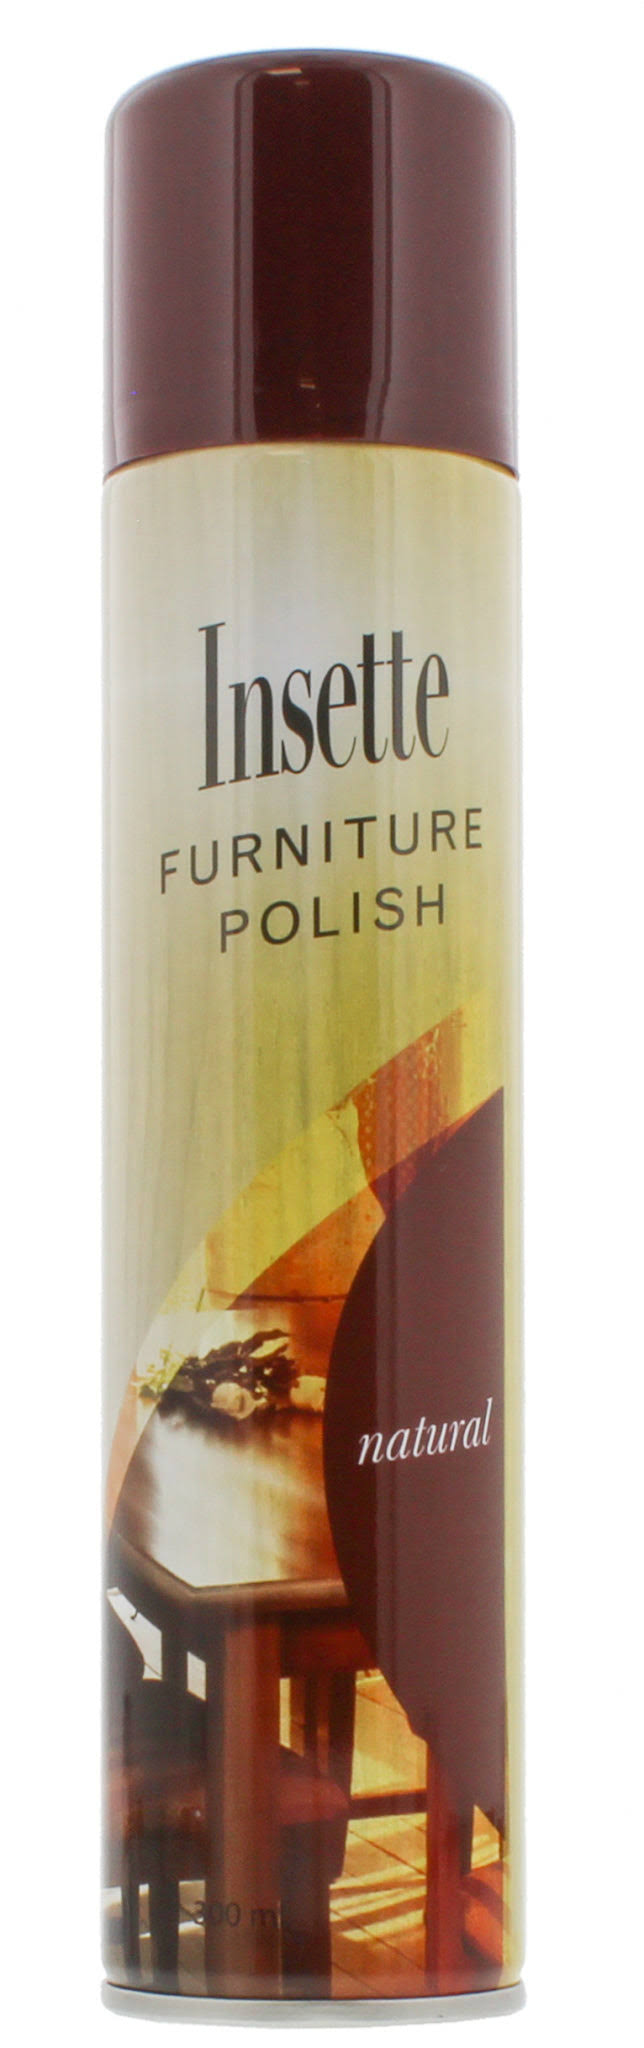 Insette Furniture Polish 300ml Natural x12 (Pack of 12)